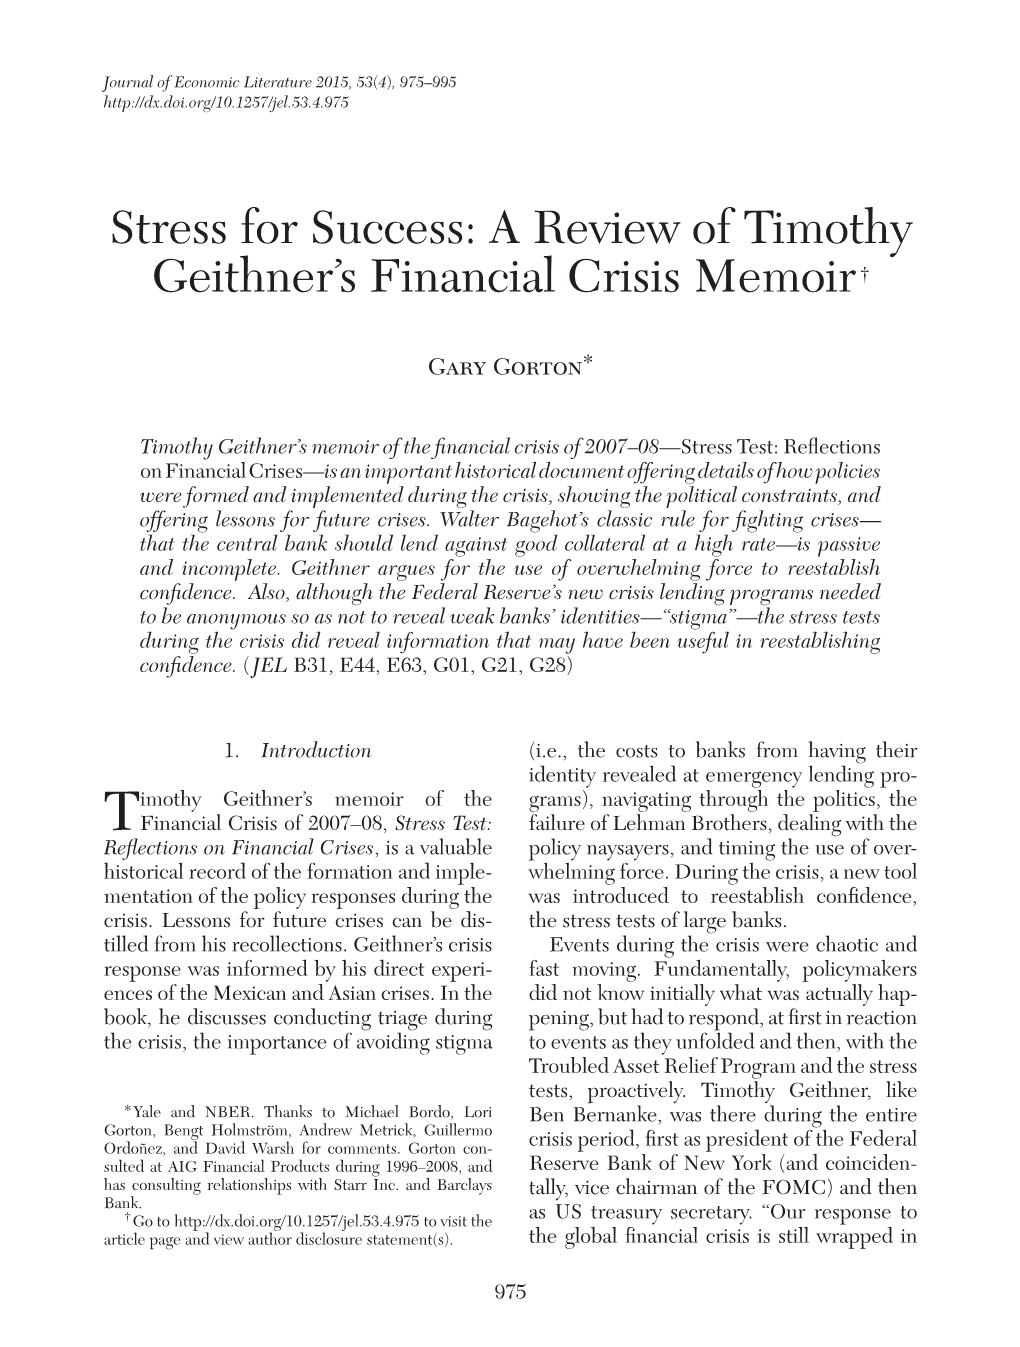 Stress for Success: a Review of Timothy Geithner's Financial Crisis